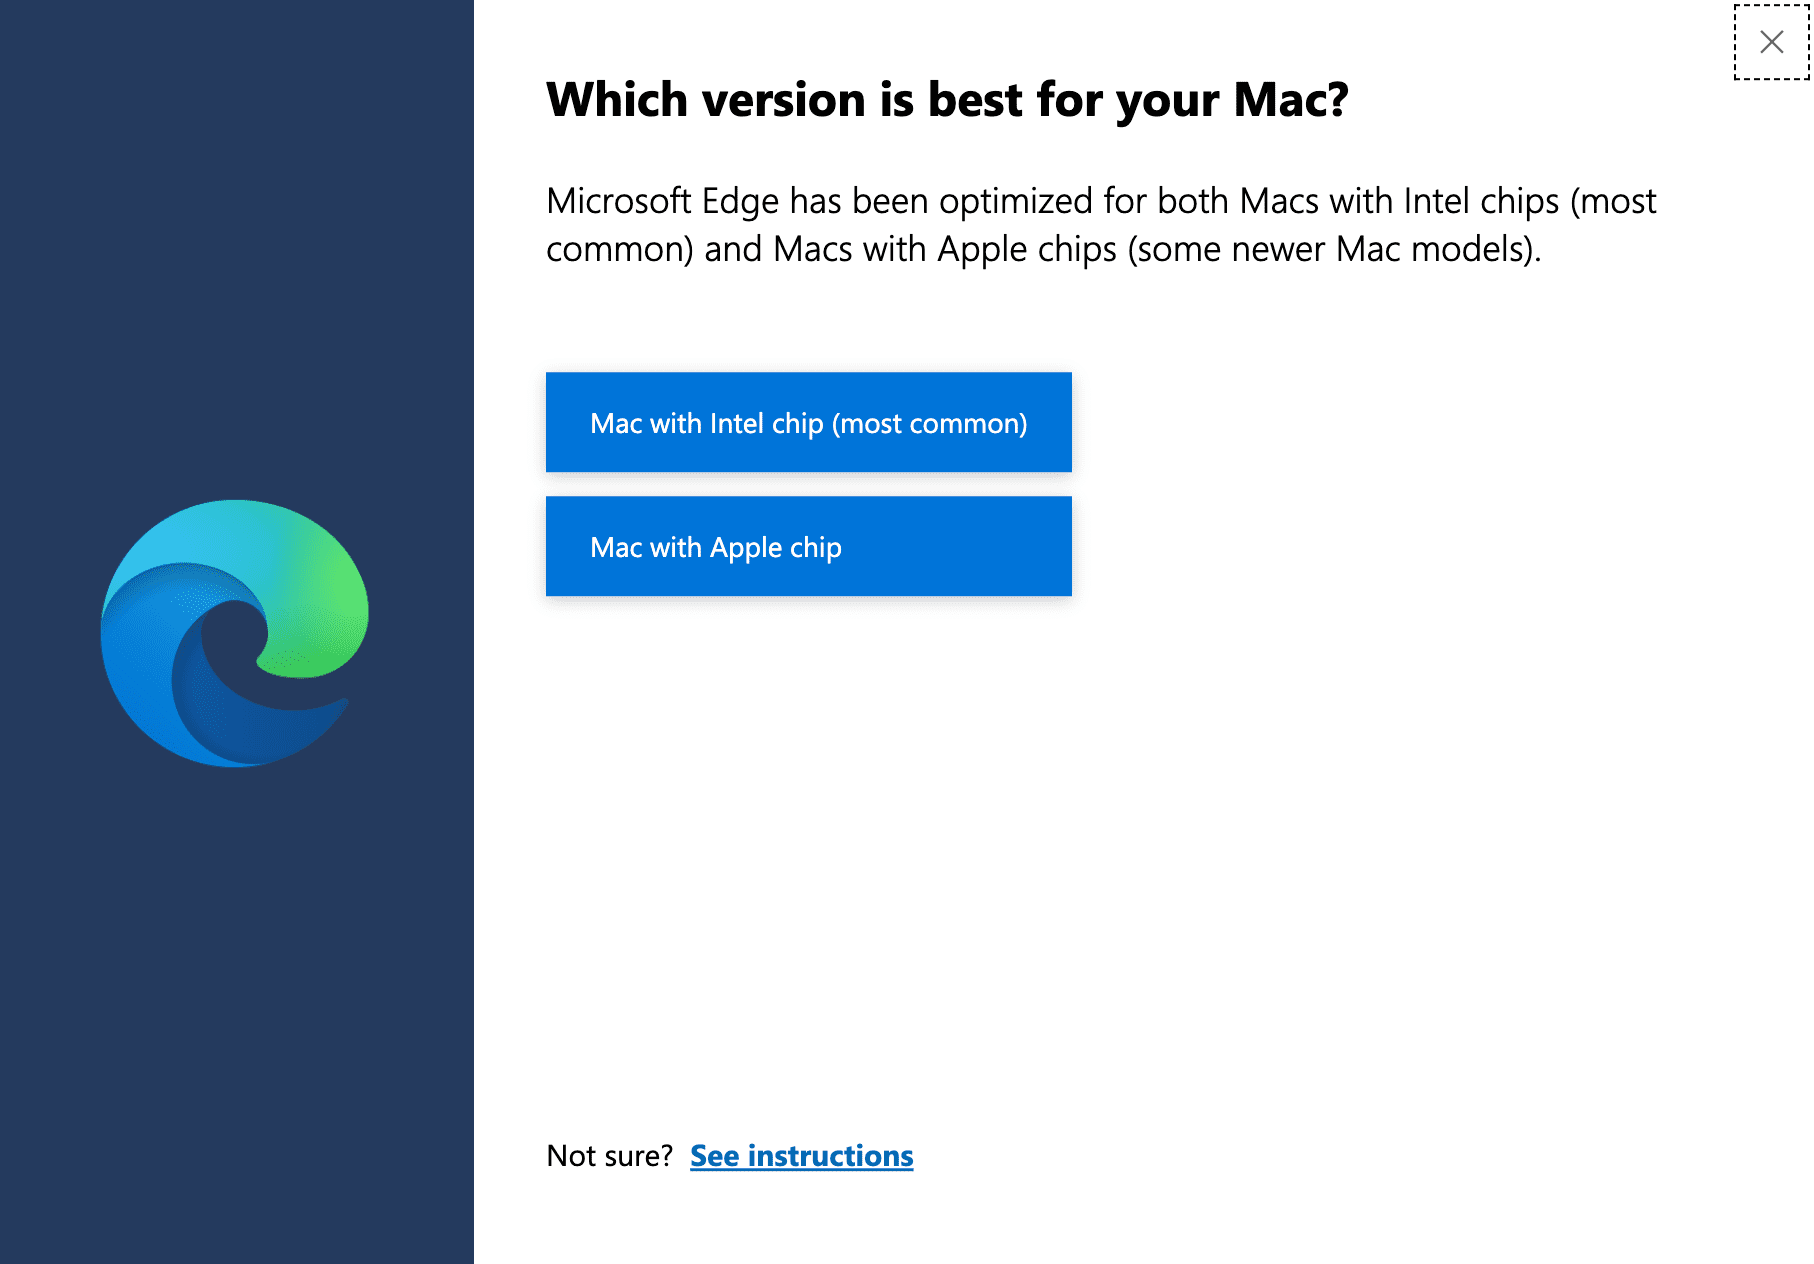 Intel or Apple silicon versions of an app for Mac